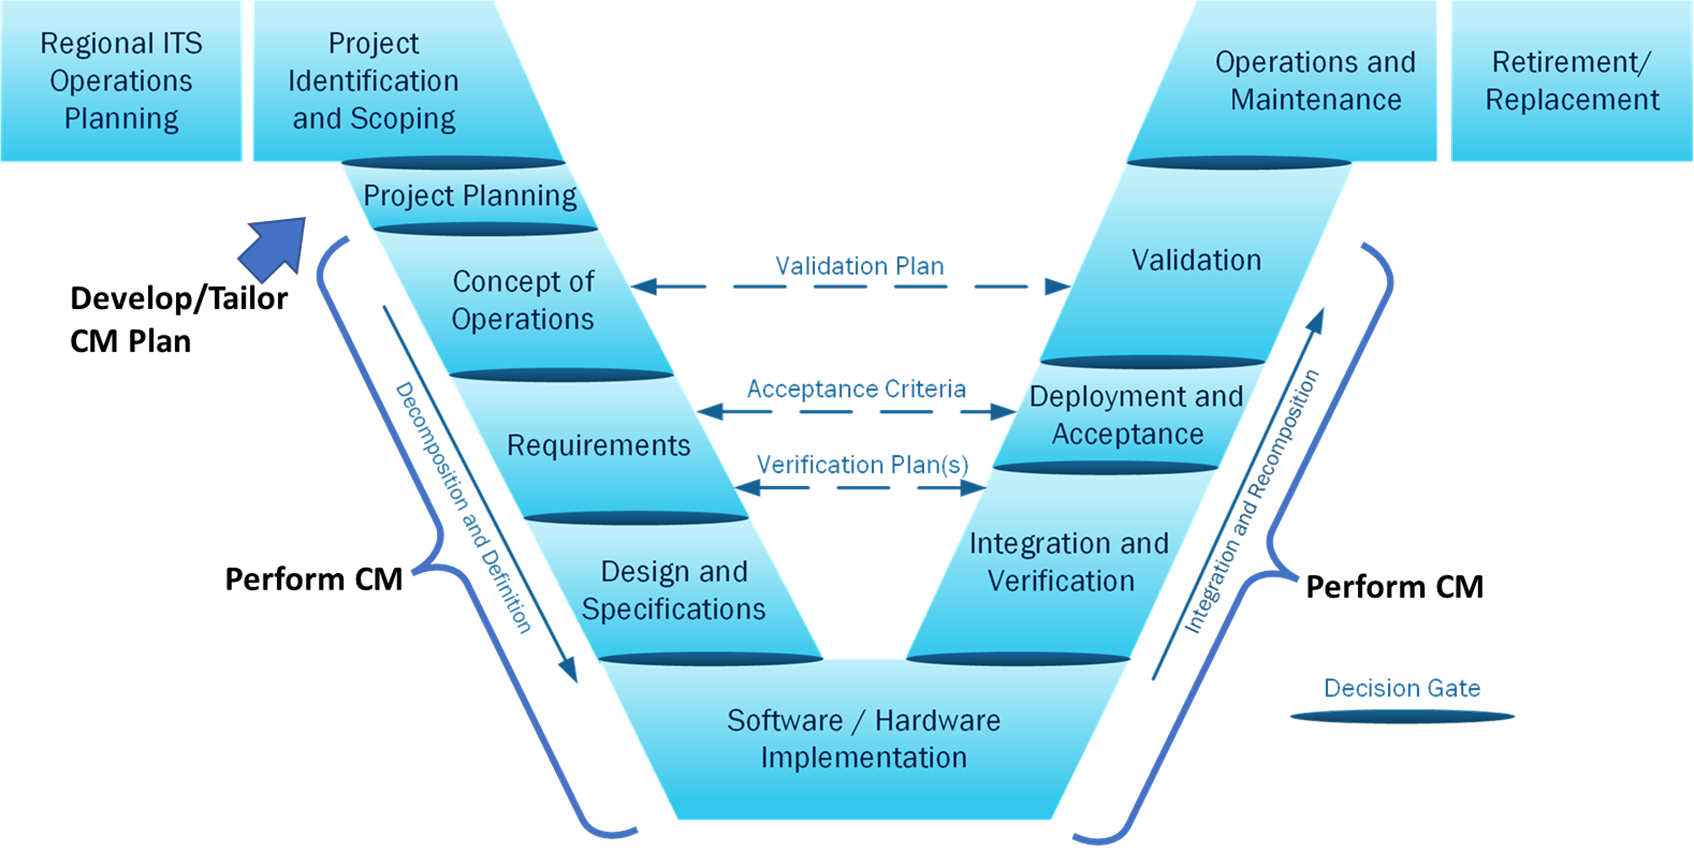 The figure shows where aspects of configuration management are implemented during the project systems engineering steps.  The CM Plan is developed or tailored during the Project Planning step.  Then CM is performed during all the remaining steps.  